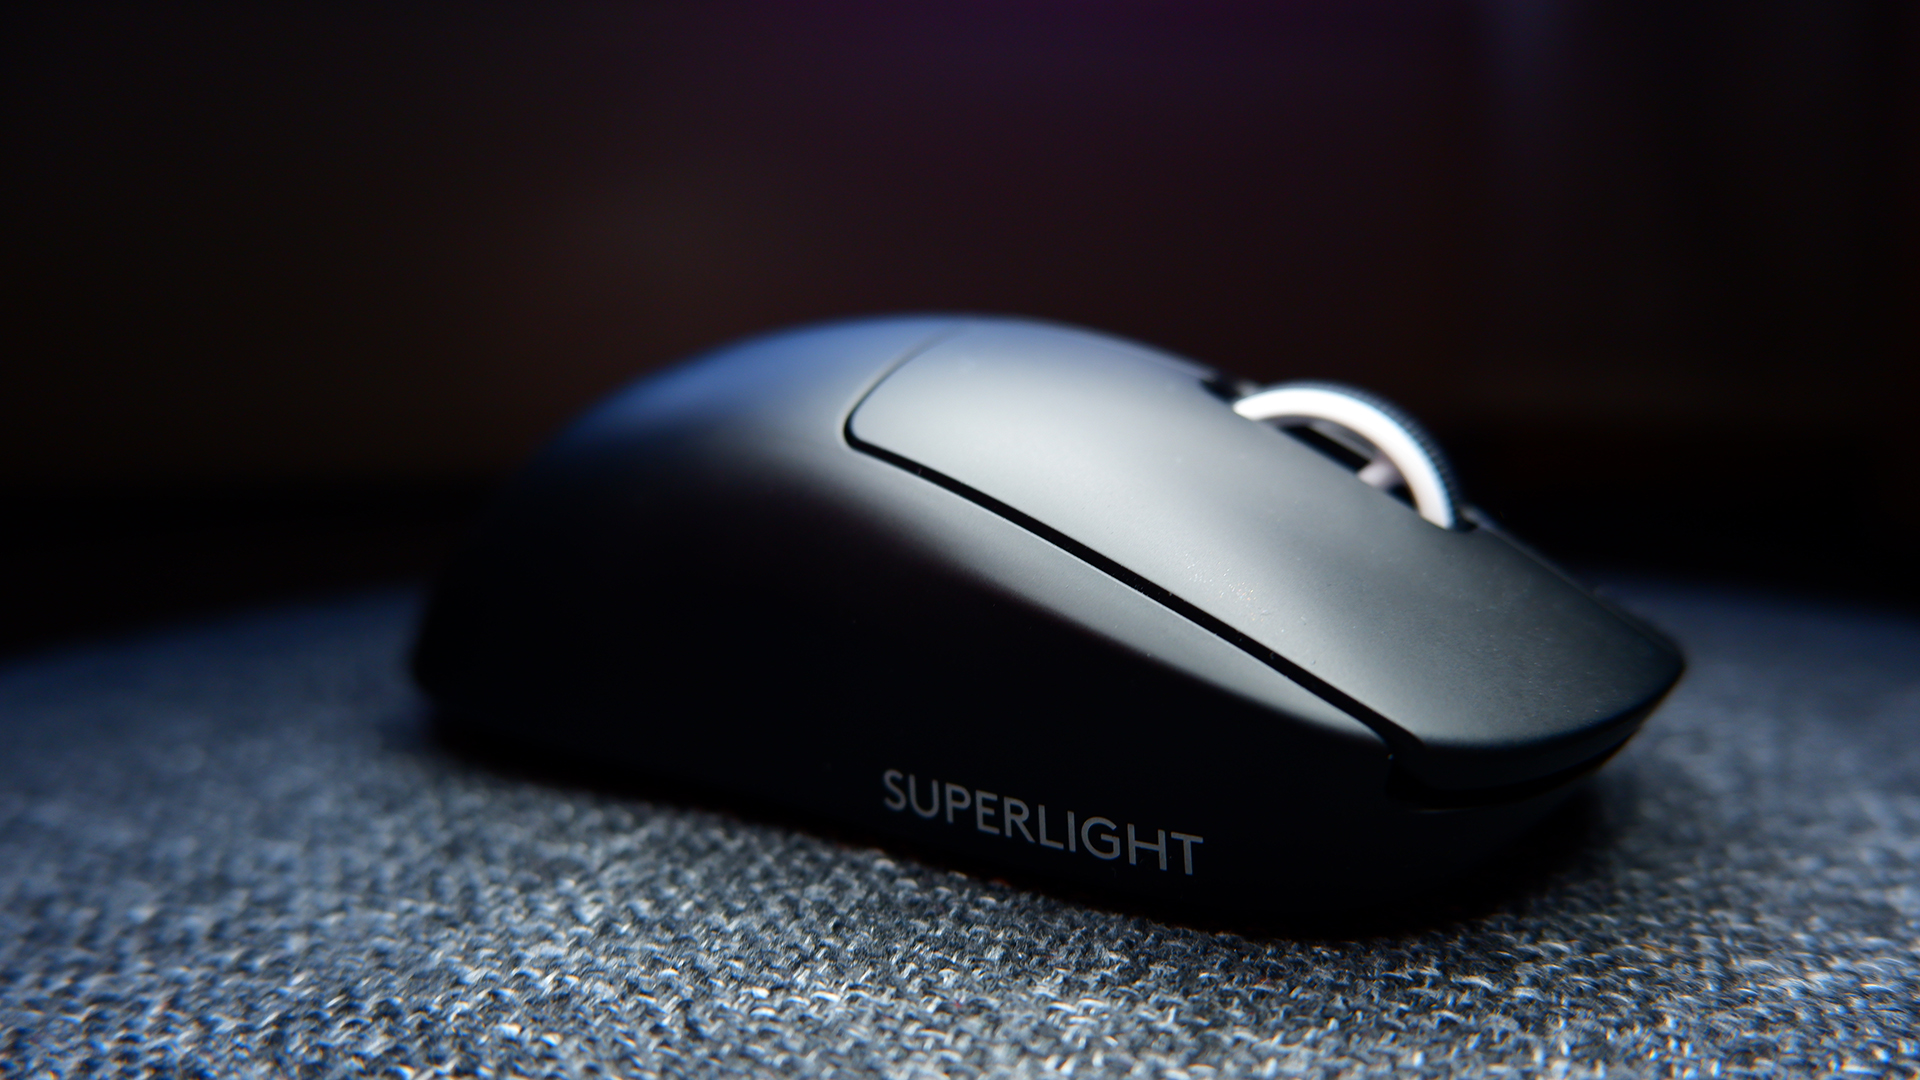 Logitech G Pro X Superlight gaming mouse review | PC Gamer